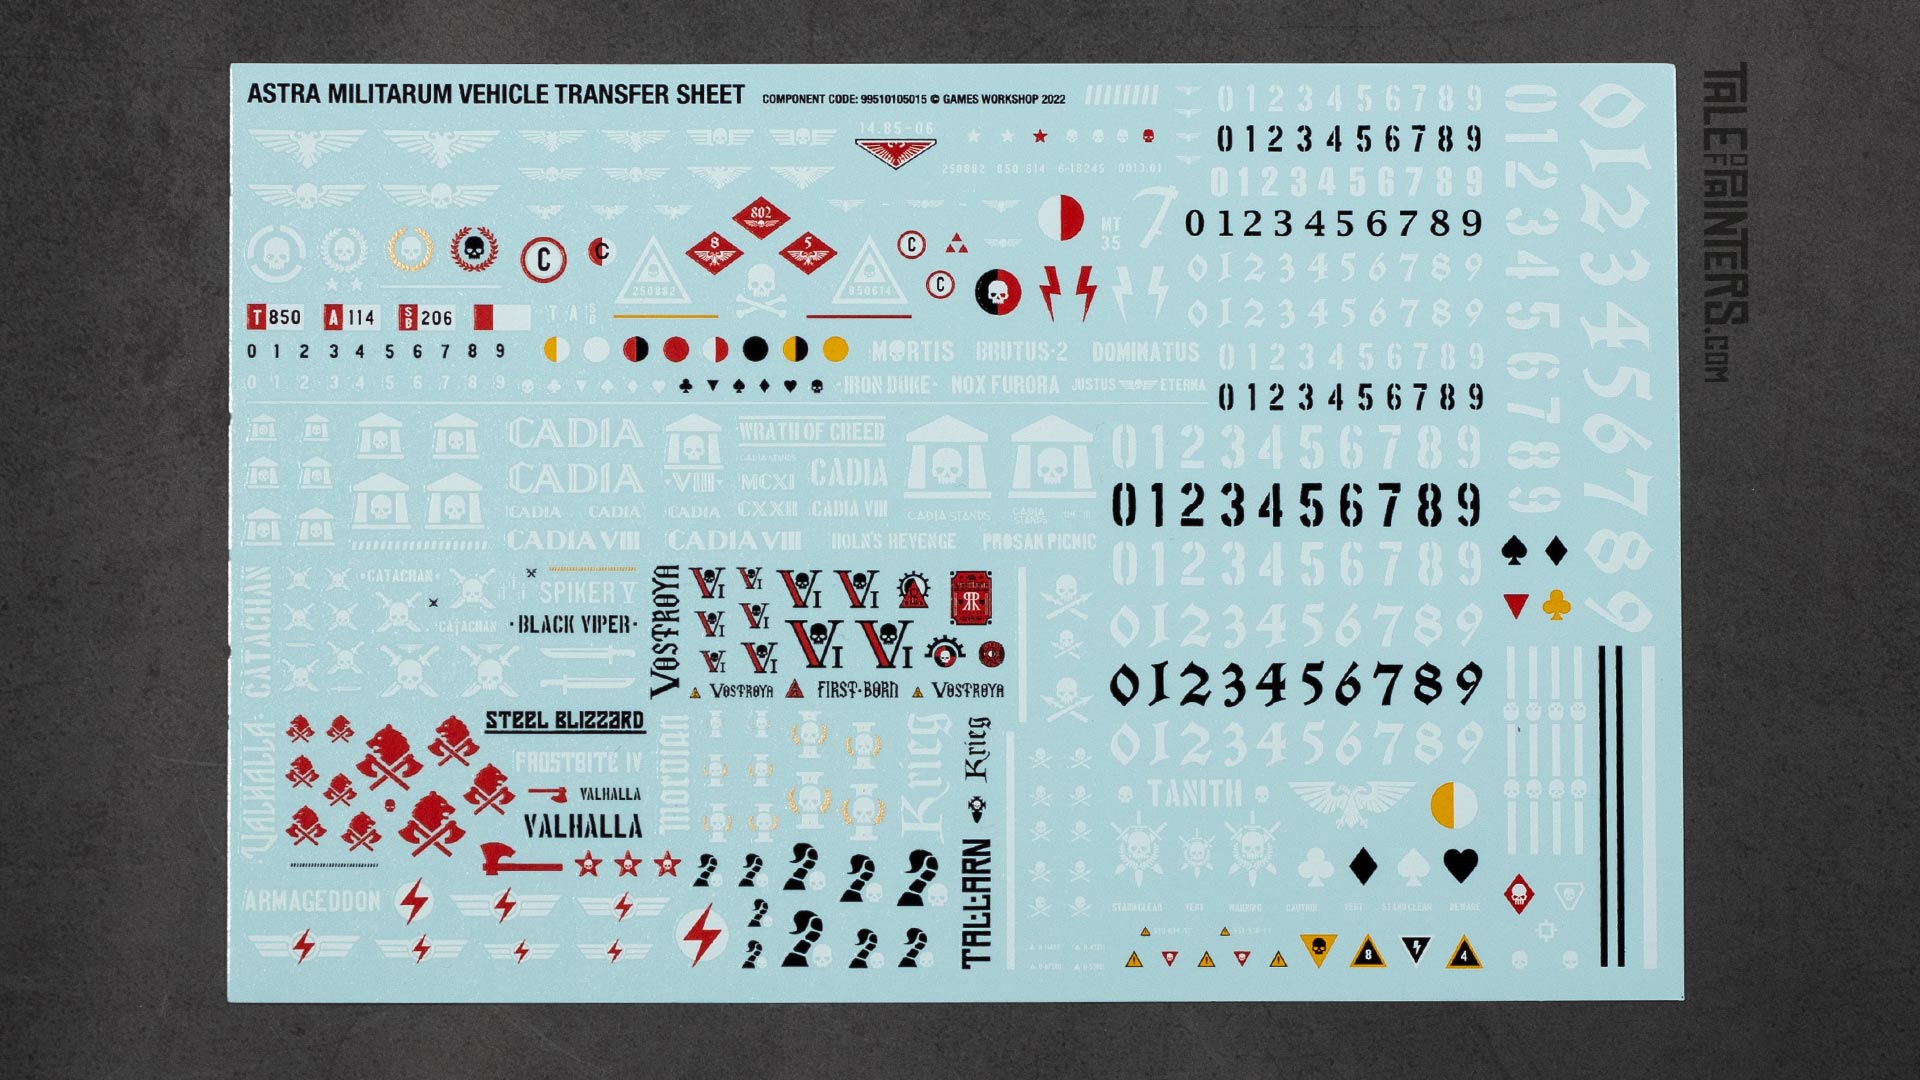 New Astra Militarum / Imperial Guard vehicle transfer / decal sheet